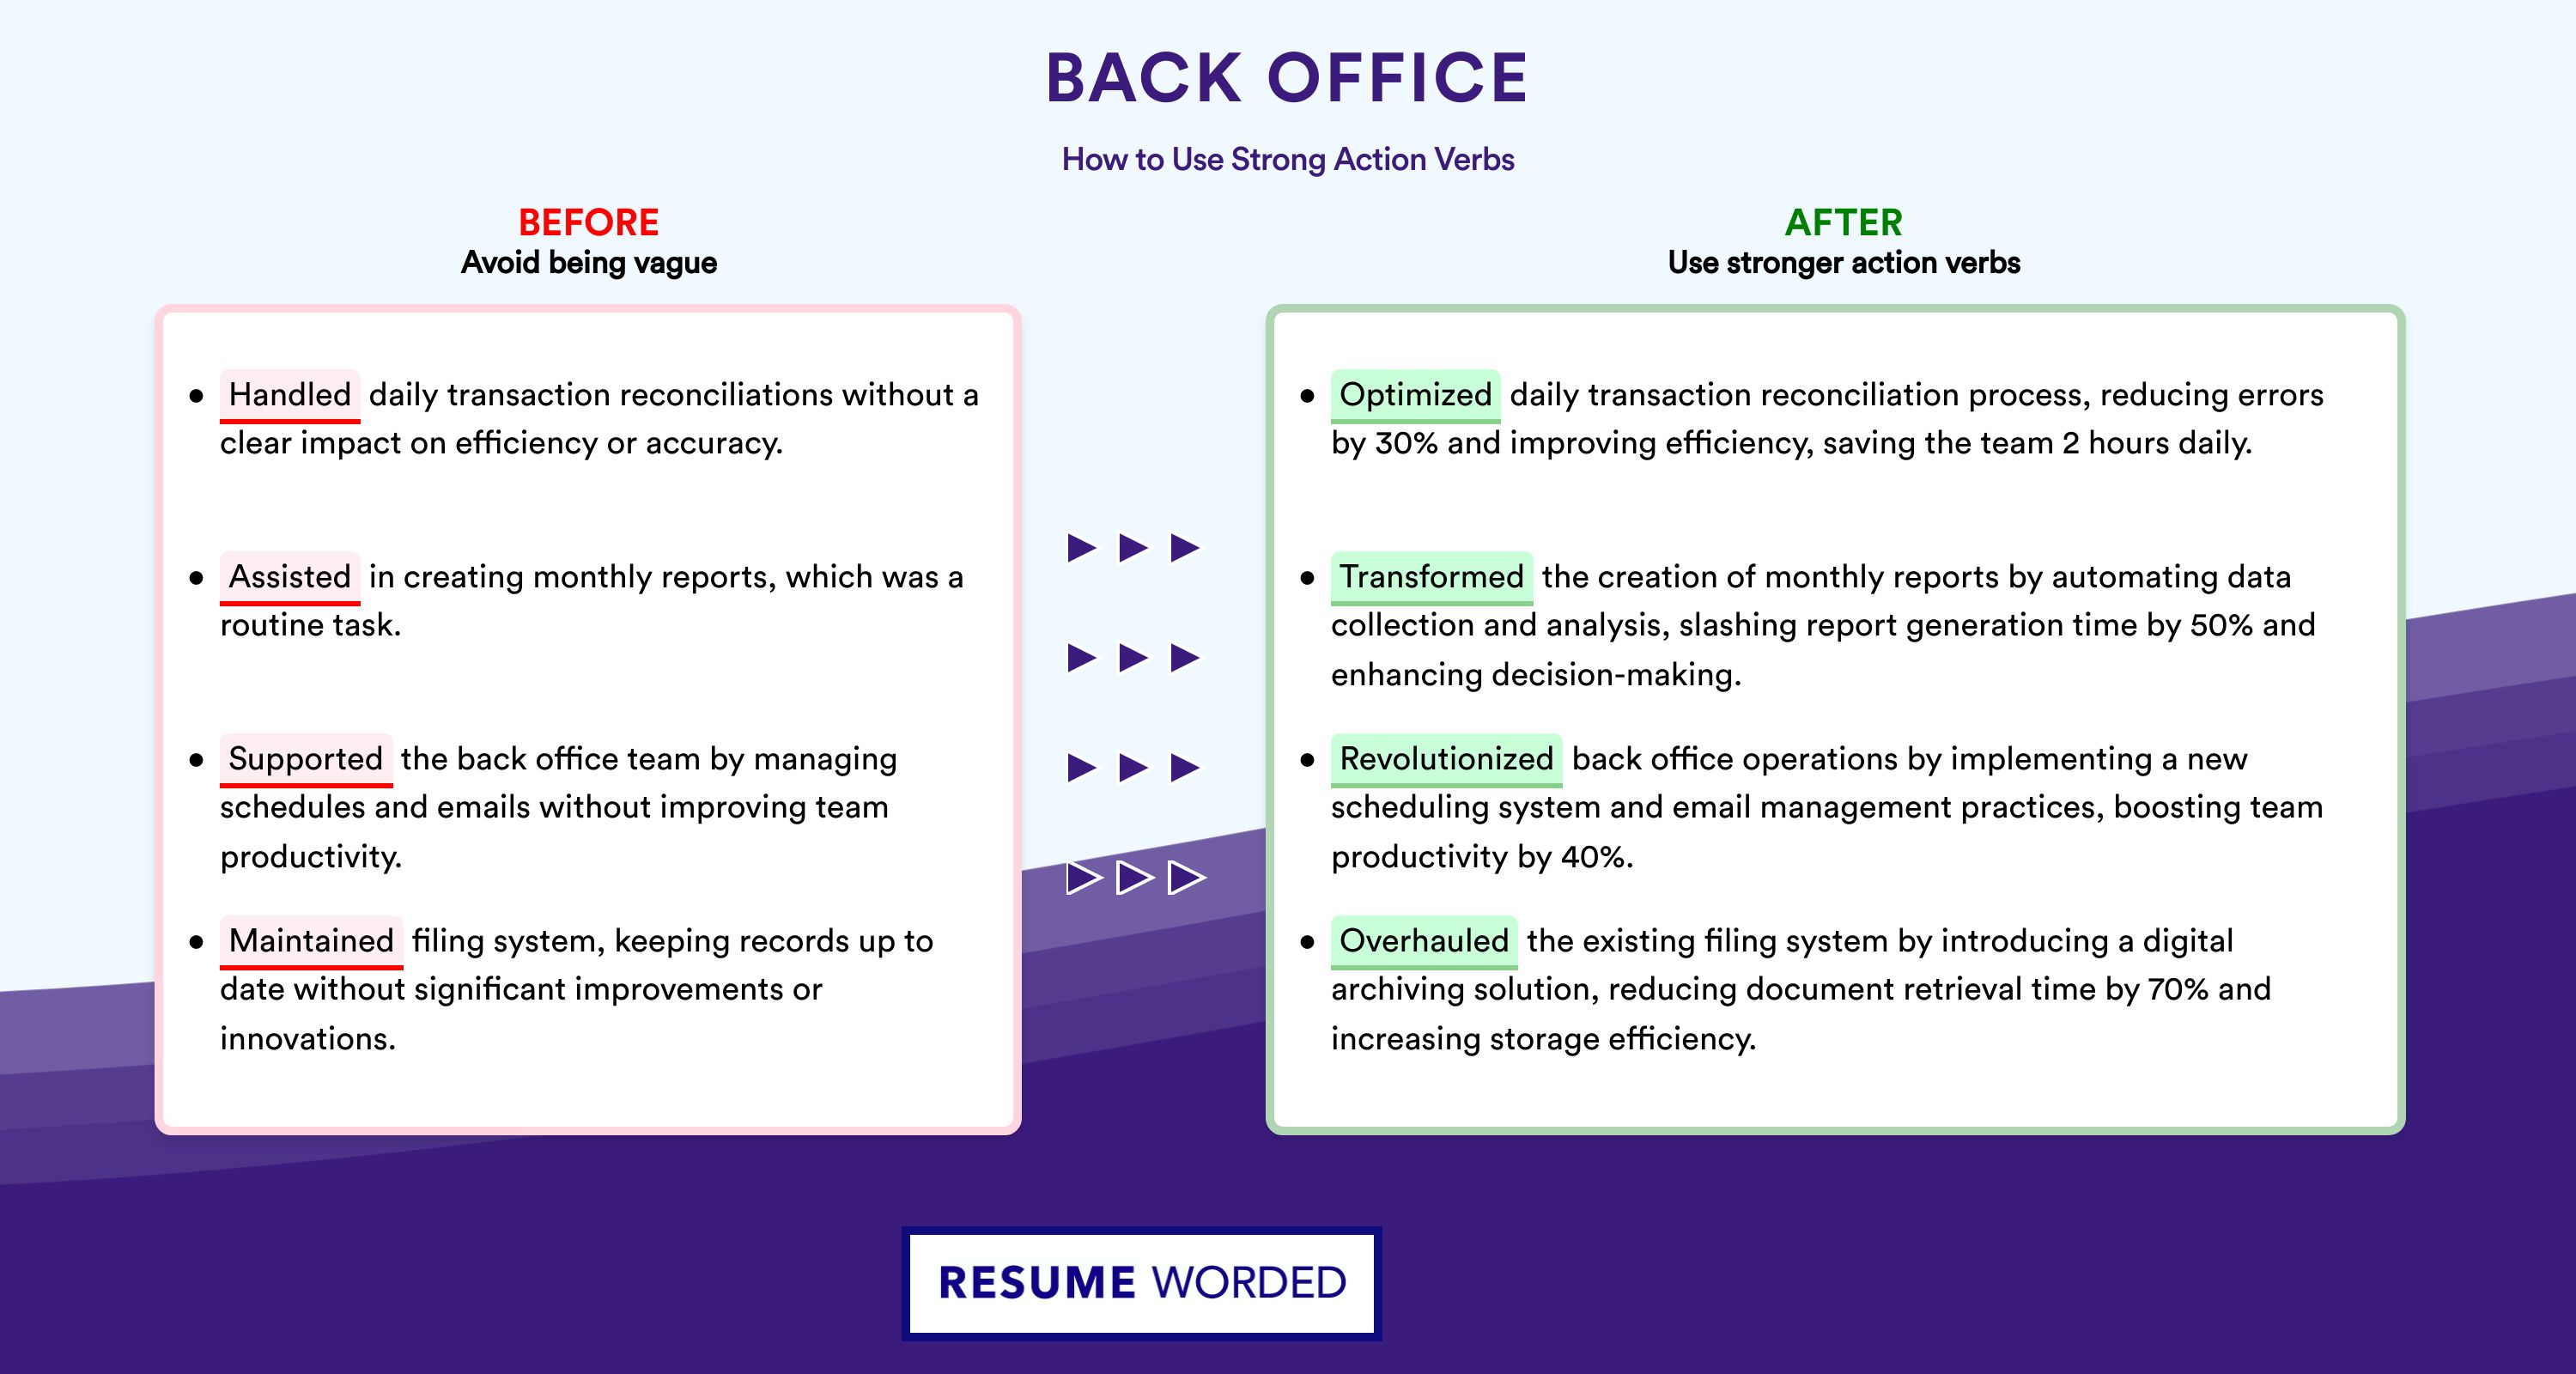 Action Verbs for Back Office